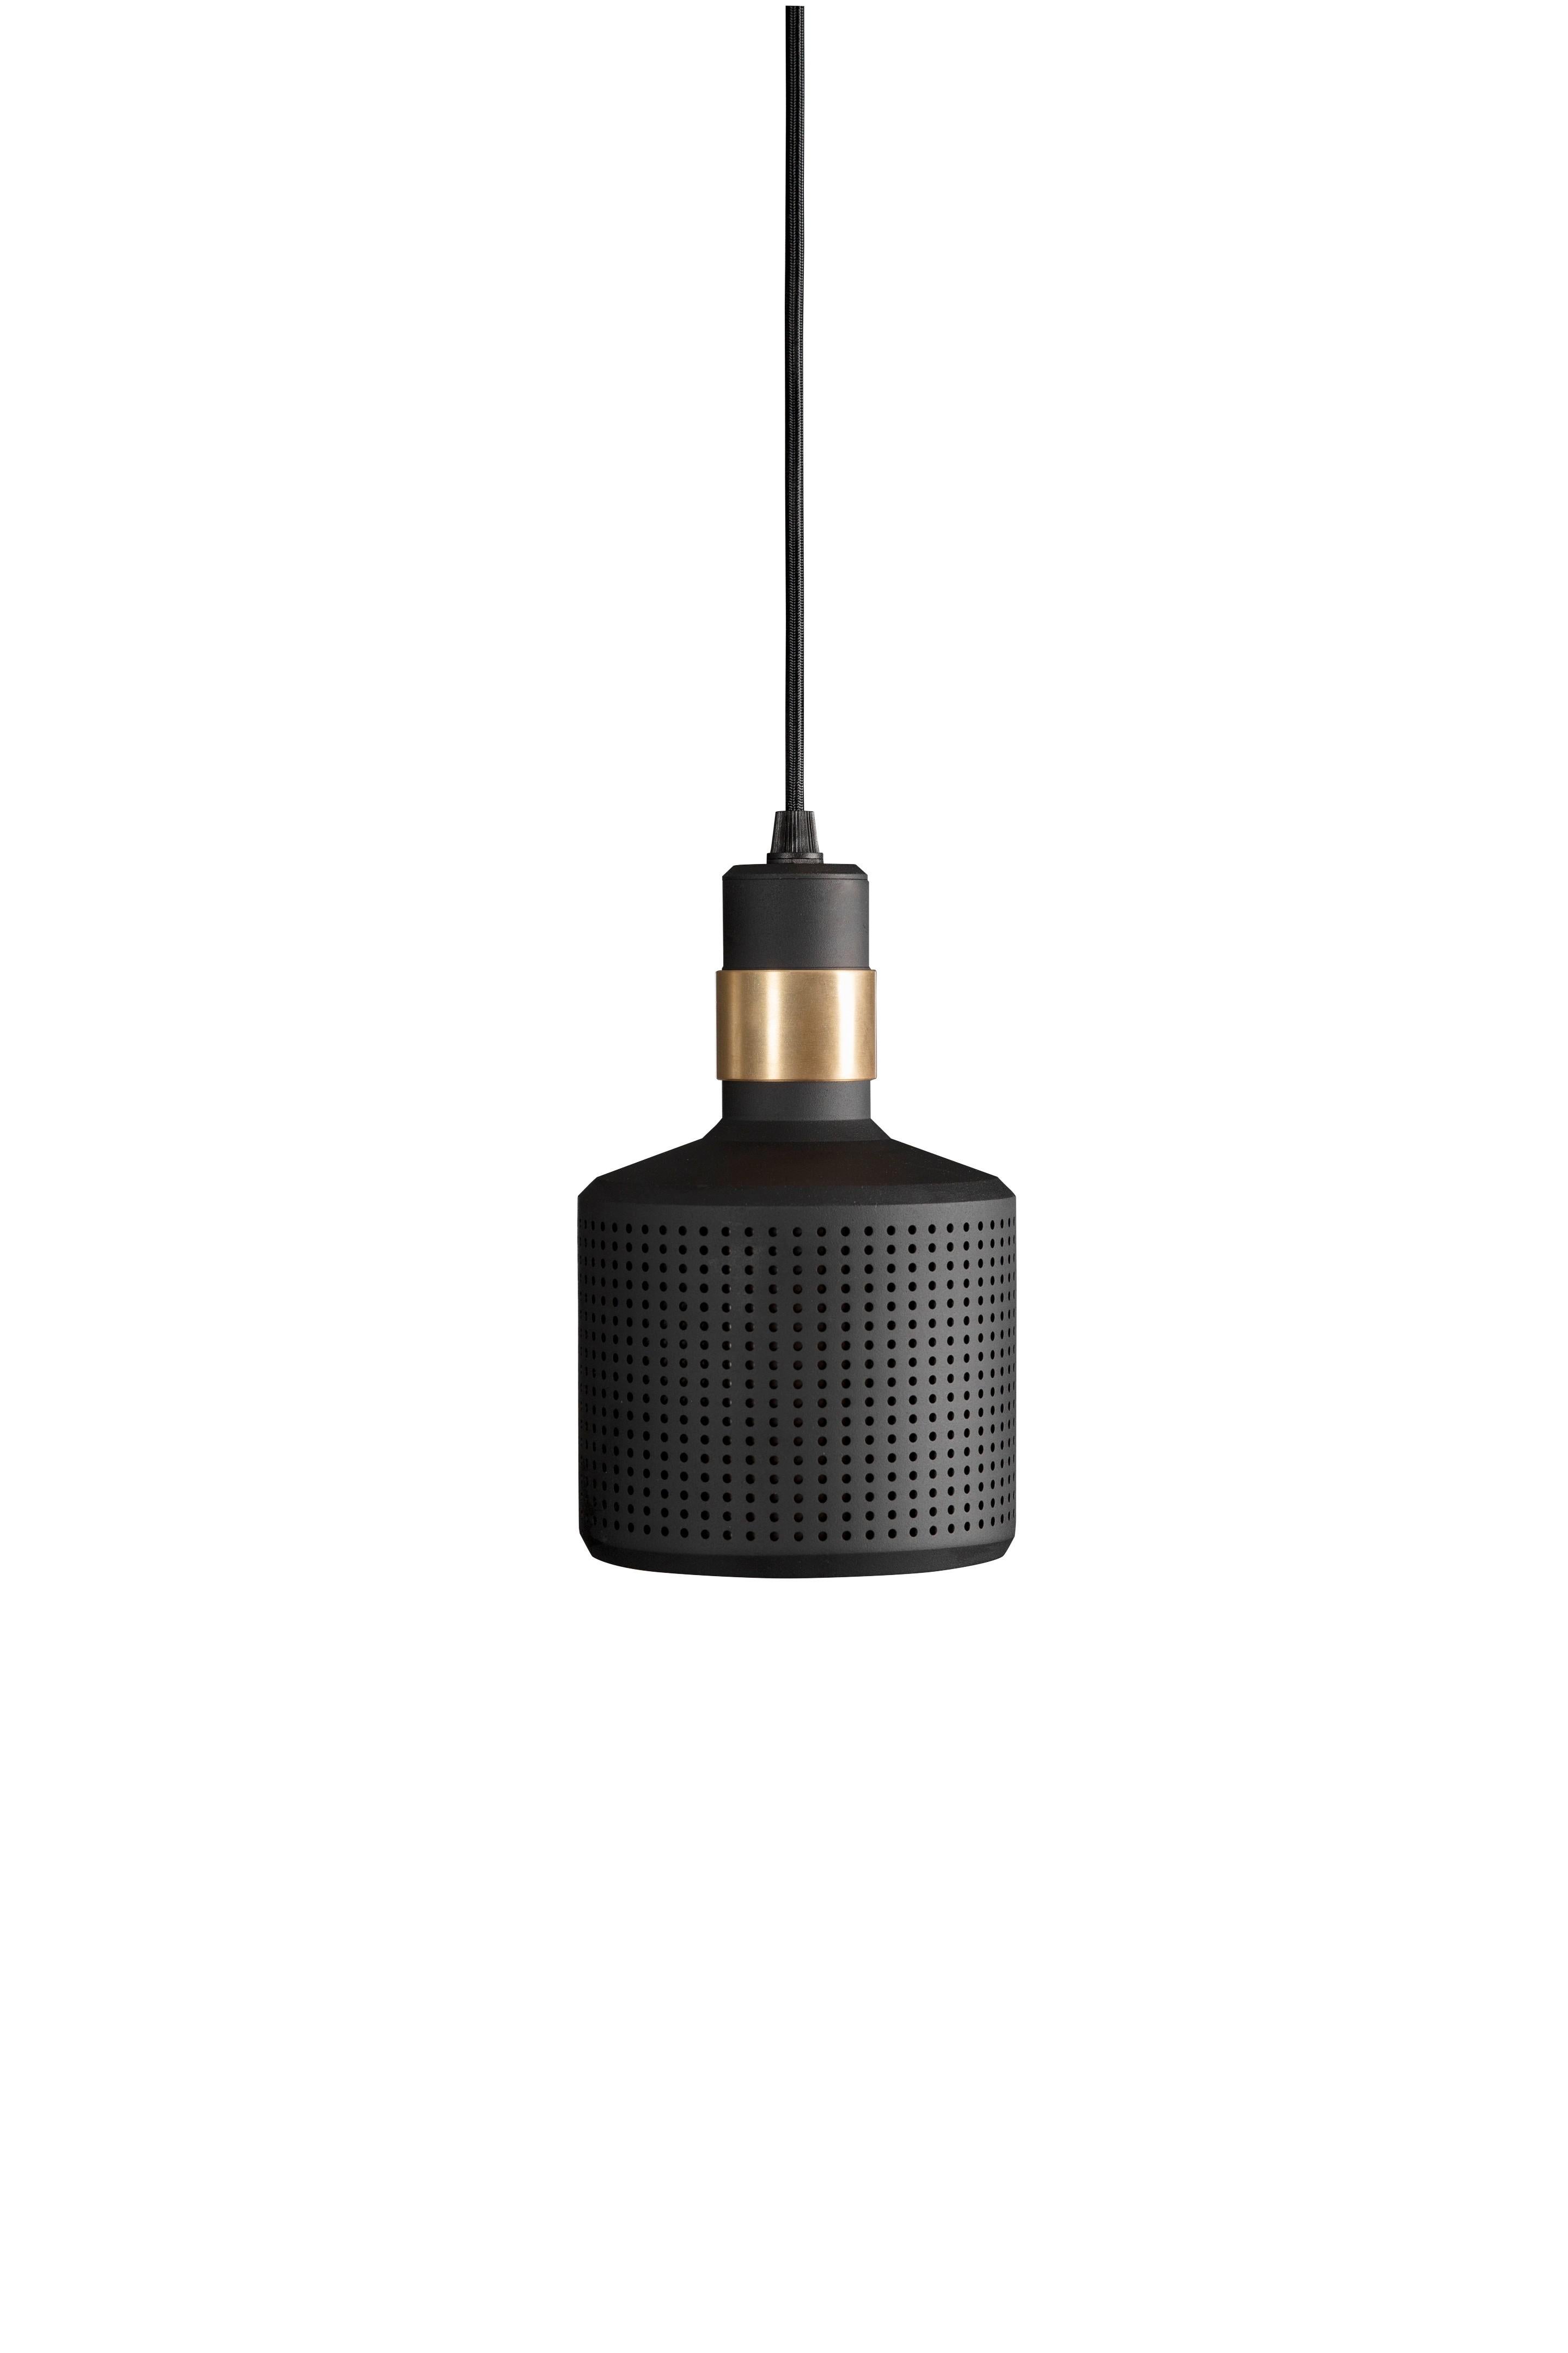 Black riddle pendant by Bert Frank.
Dimensions: H 20 x W 12 x D 12 cm
Materials: Brass and steel

Available finishes: Brass and black
All our lamps can be wired according to each country. If sold to the USA it will be wired for the USA for